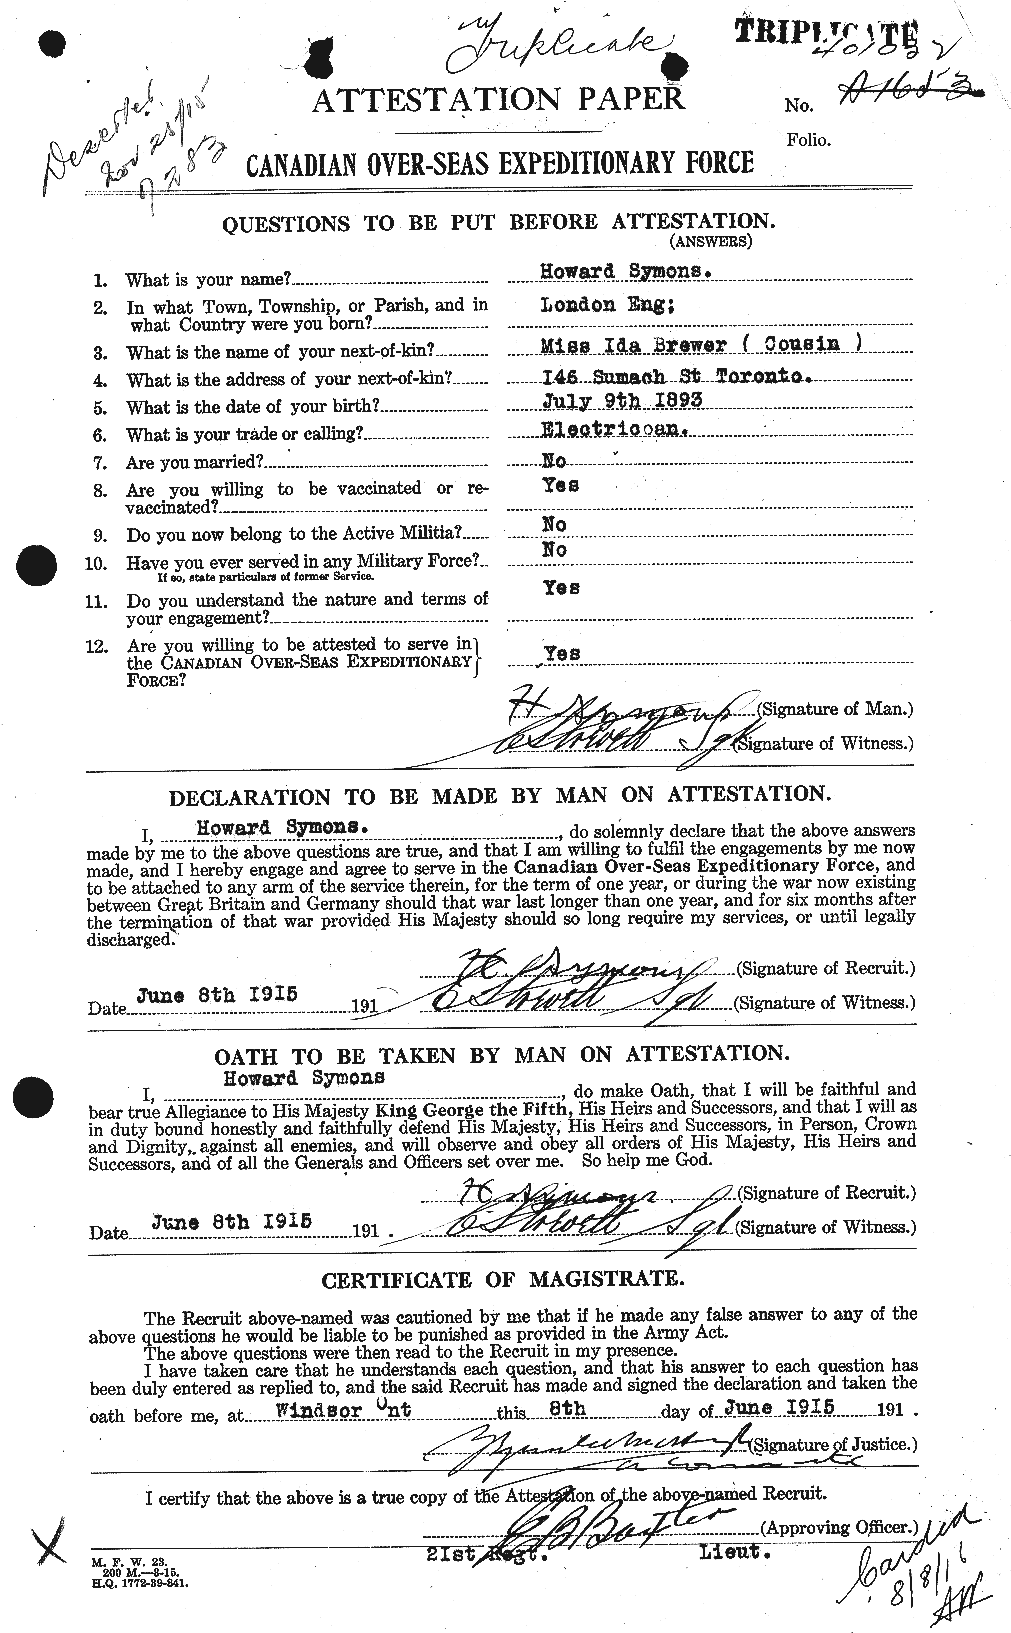 Personnel Records of the First World War - CEF 129051a